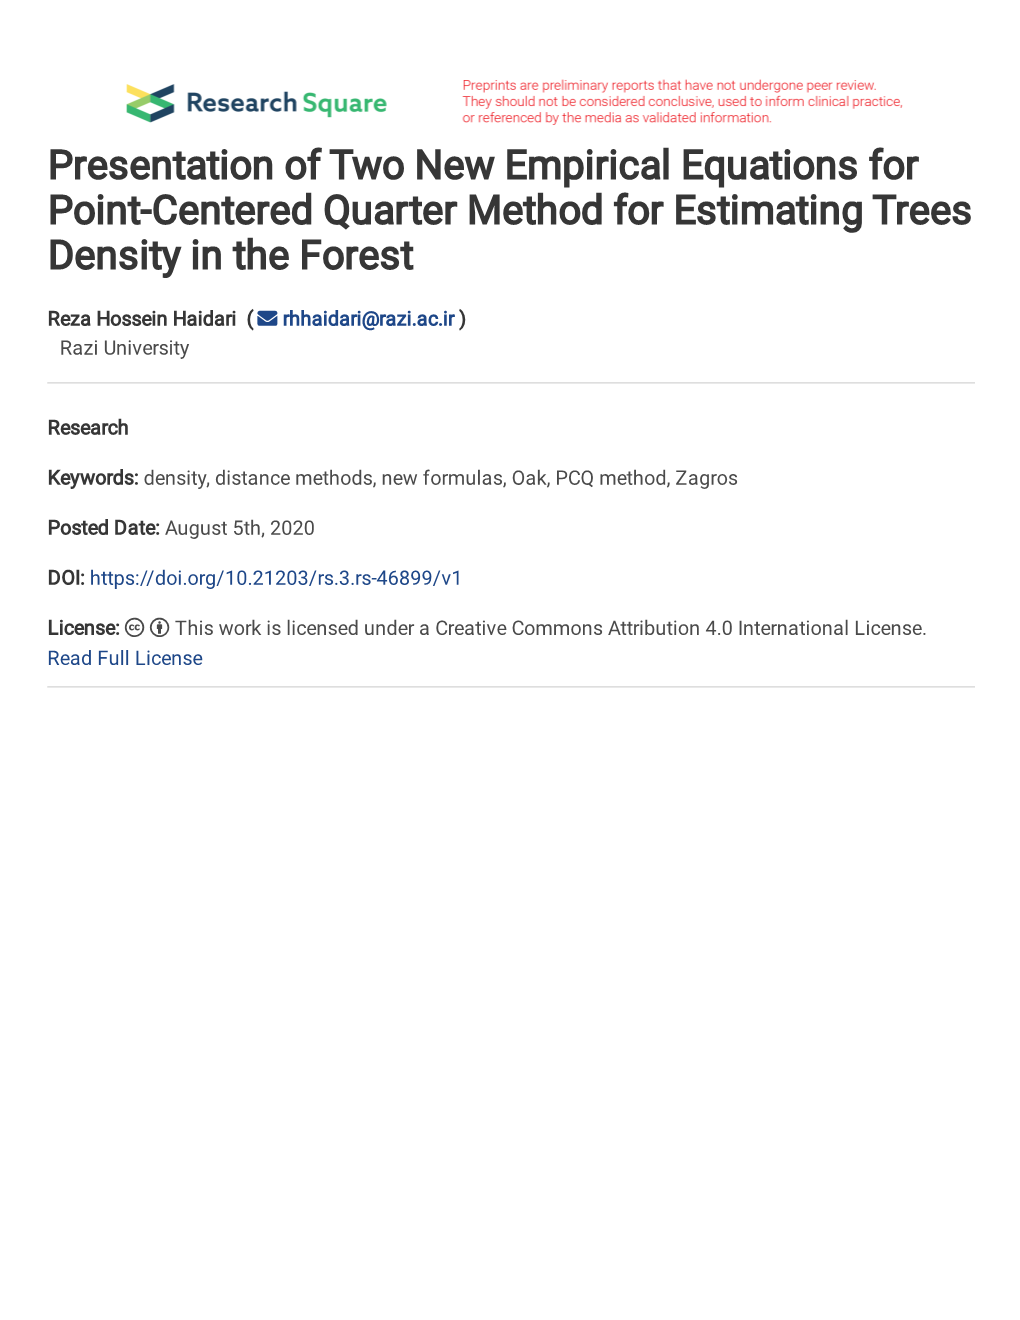 1 Presentation of Two New Empirical Equations for Point-Centered Quarter Method For